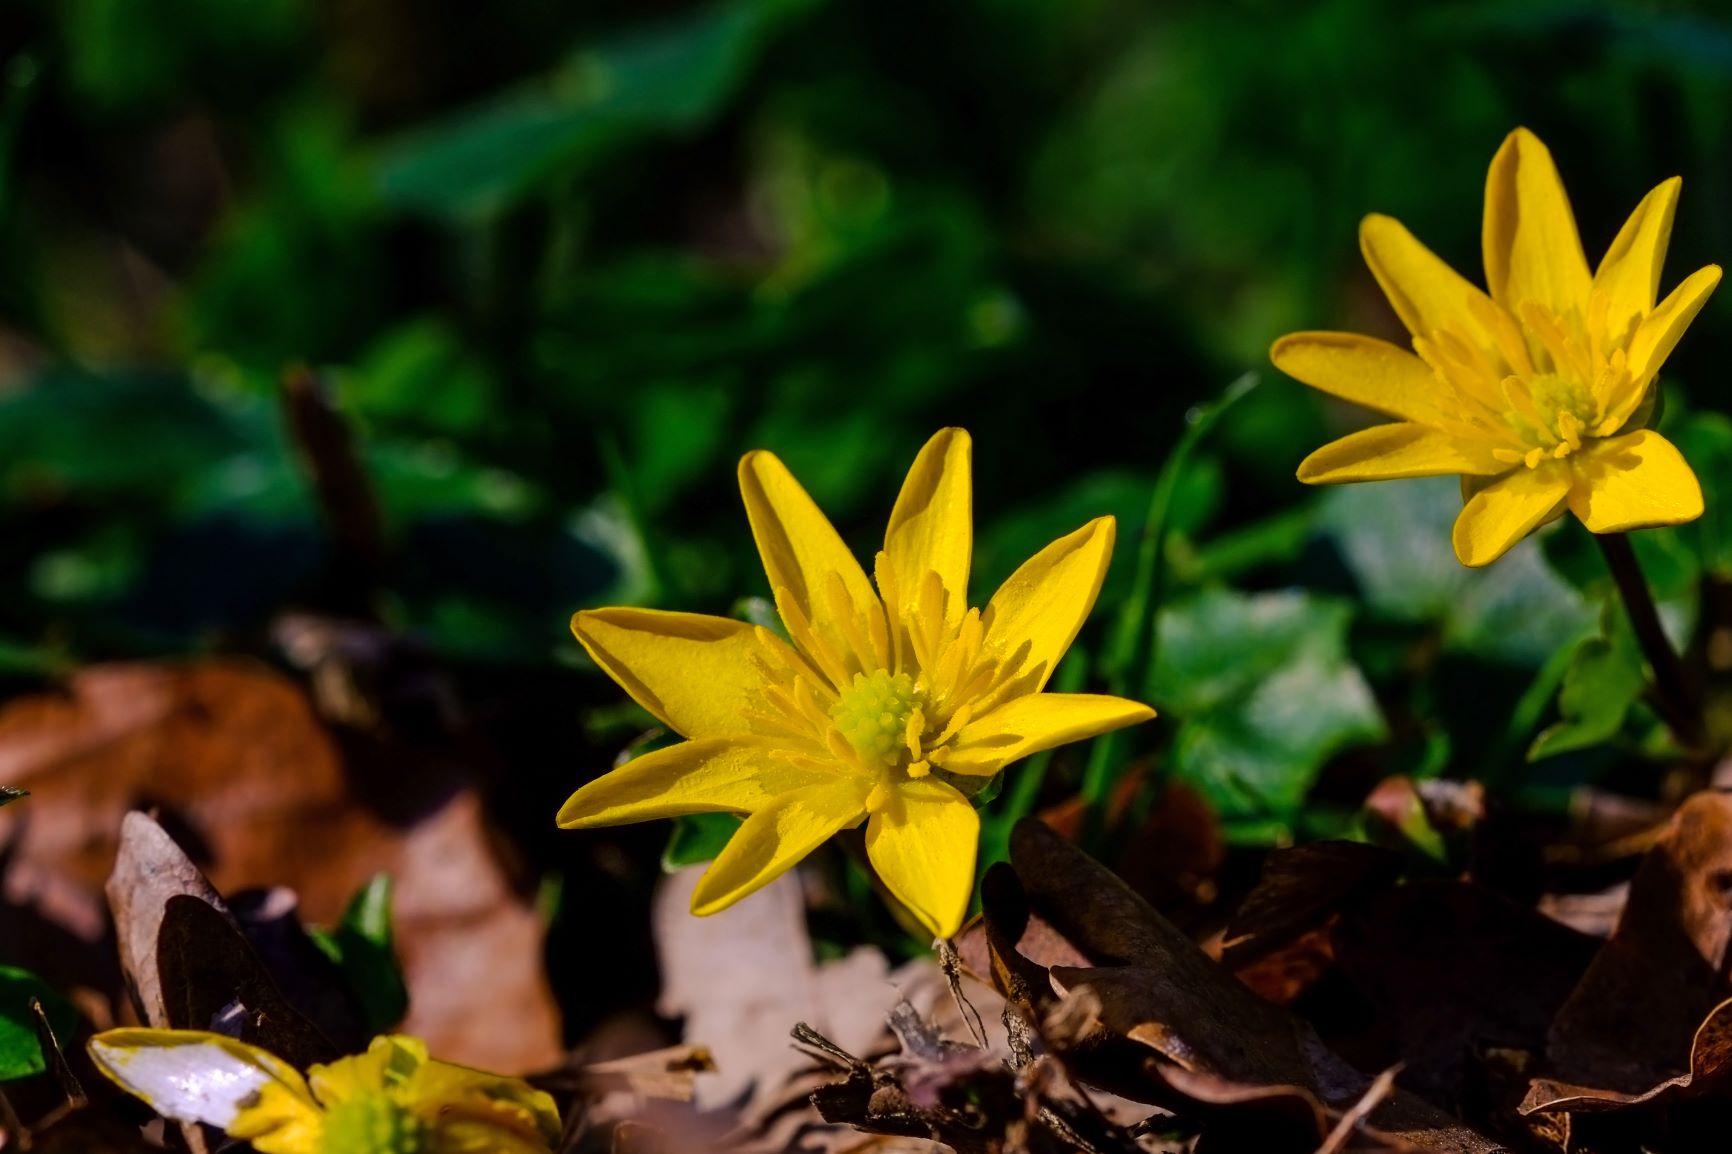 Close up of two yellow, star-shaped lesser celandine flowers amongst green foliage and brown leaves on the Forest floor